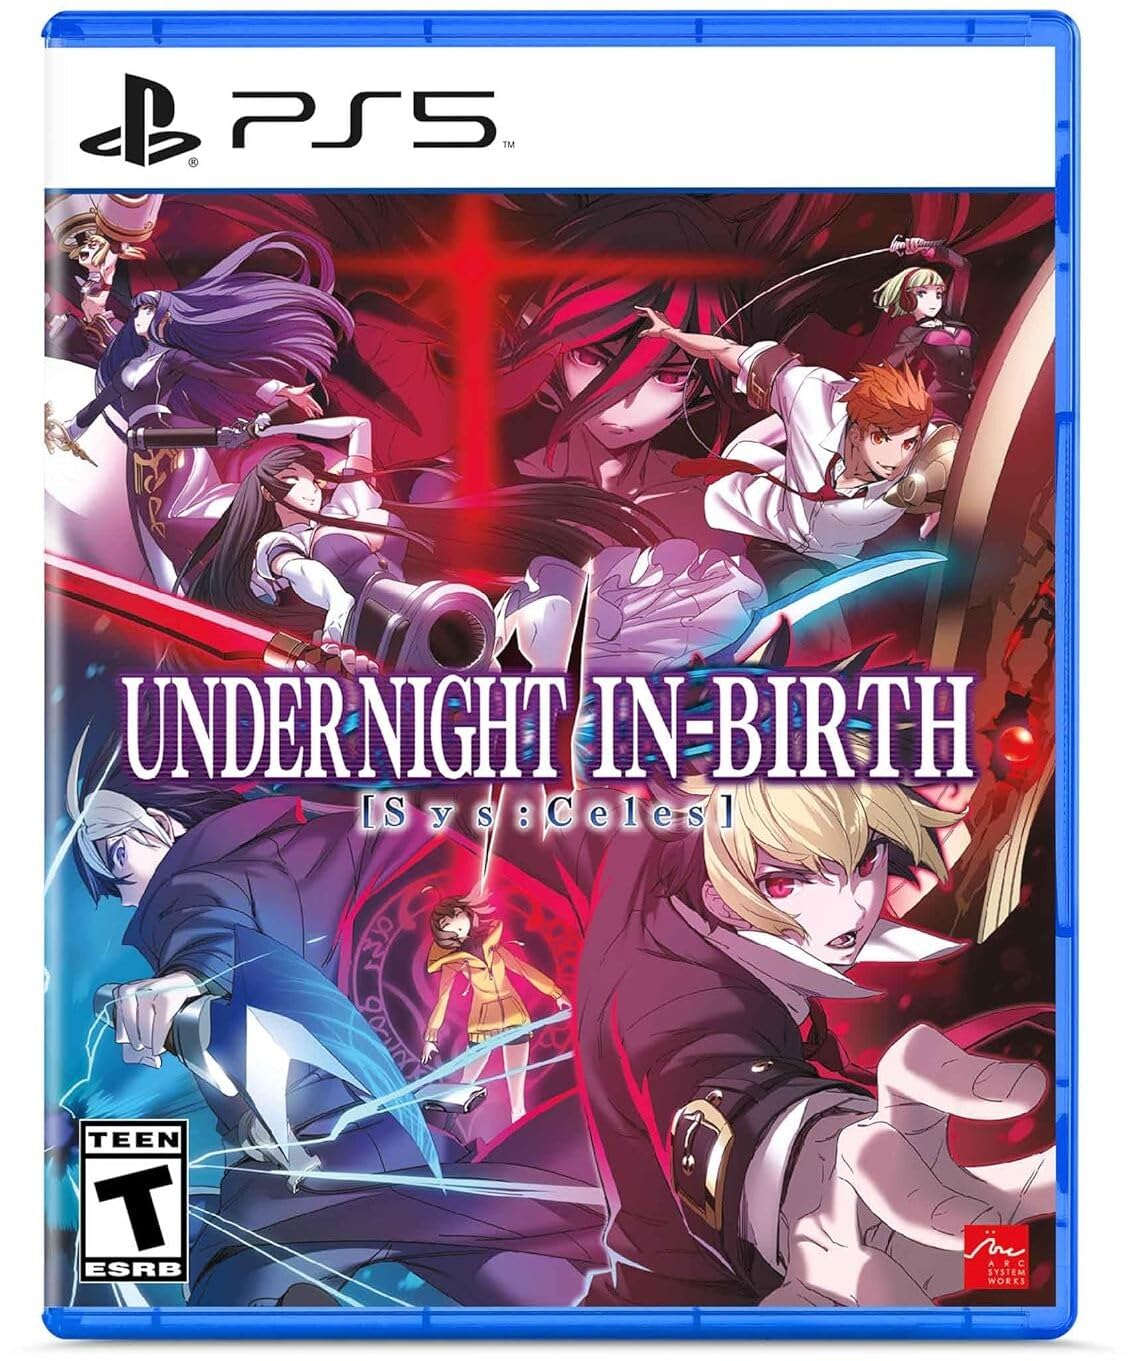 Under Night In-Birth II [Sys:Celes] (PS5) $35 + Free Shipping via Amazon